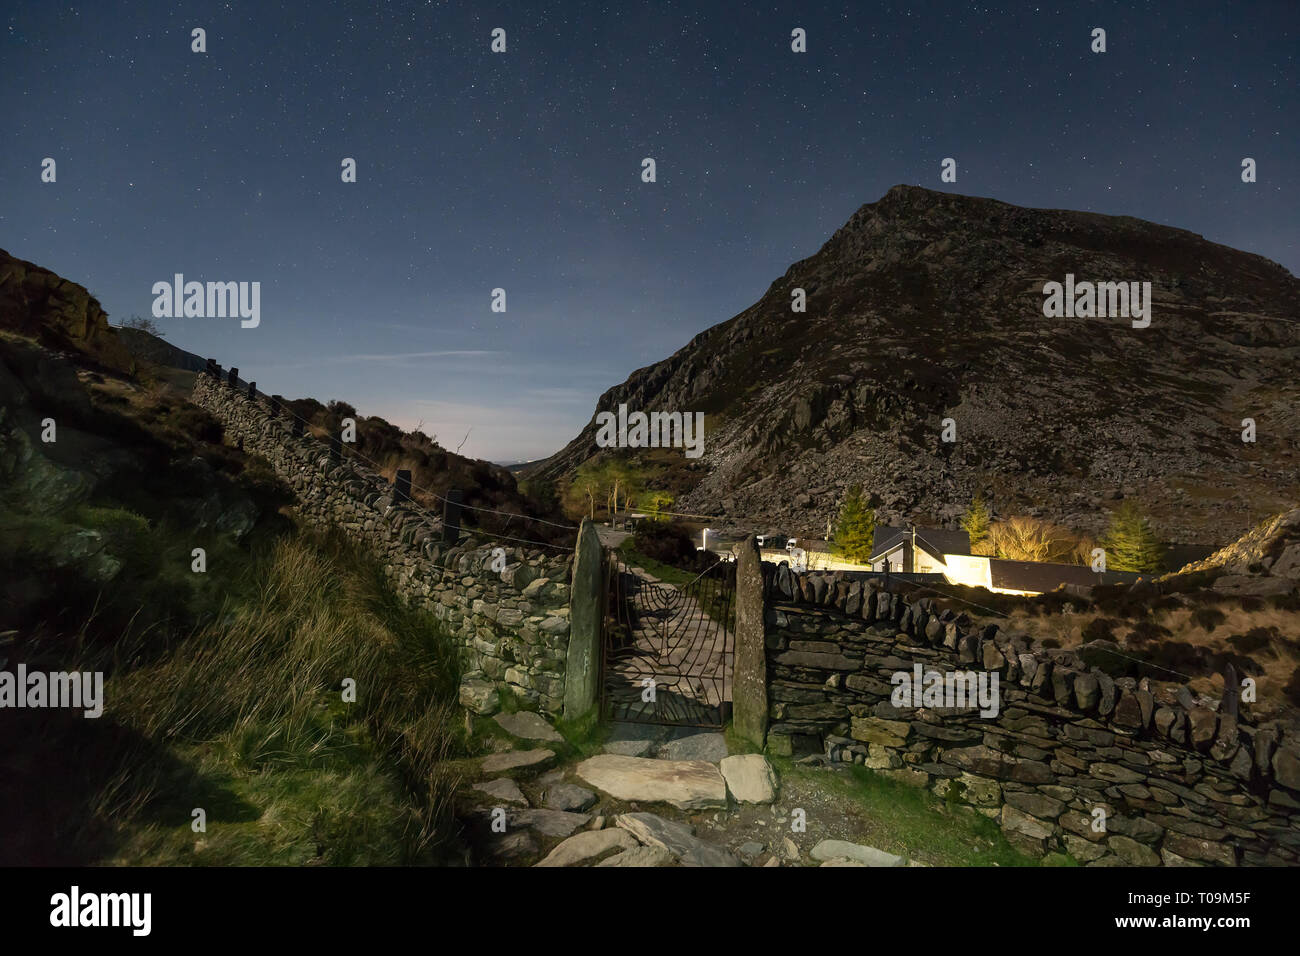 Scenic, starry, night time view in Snowdonia National Park, looking across to Pen yr Ole Wen after mountain walk at night returning from Llyn Idwal. Stock Photo